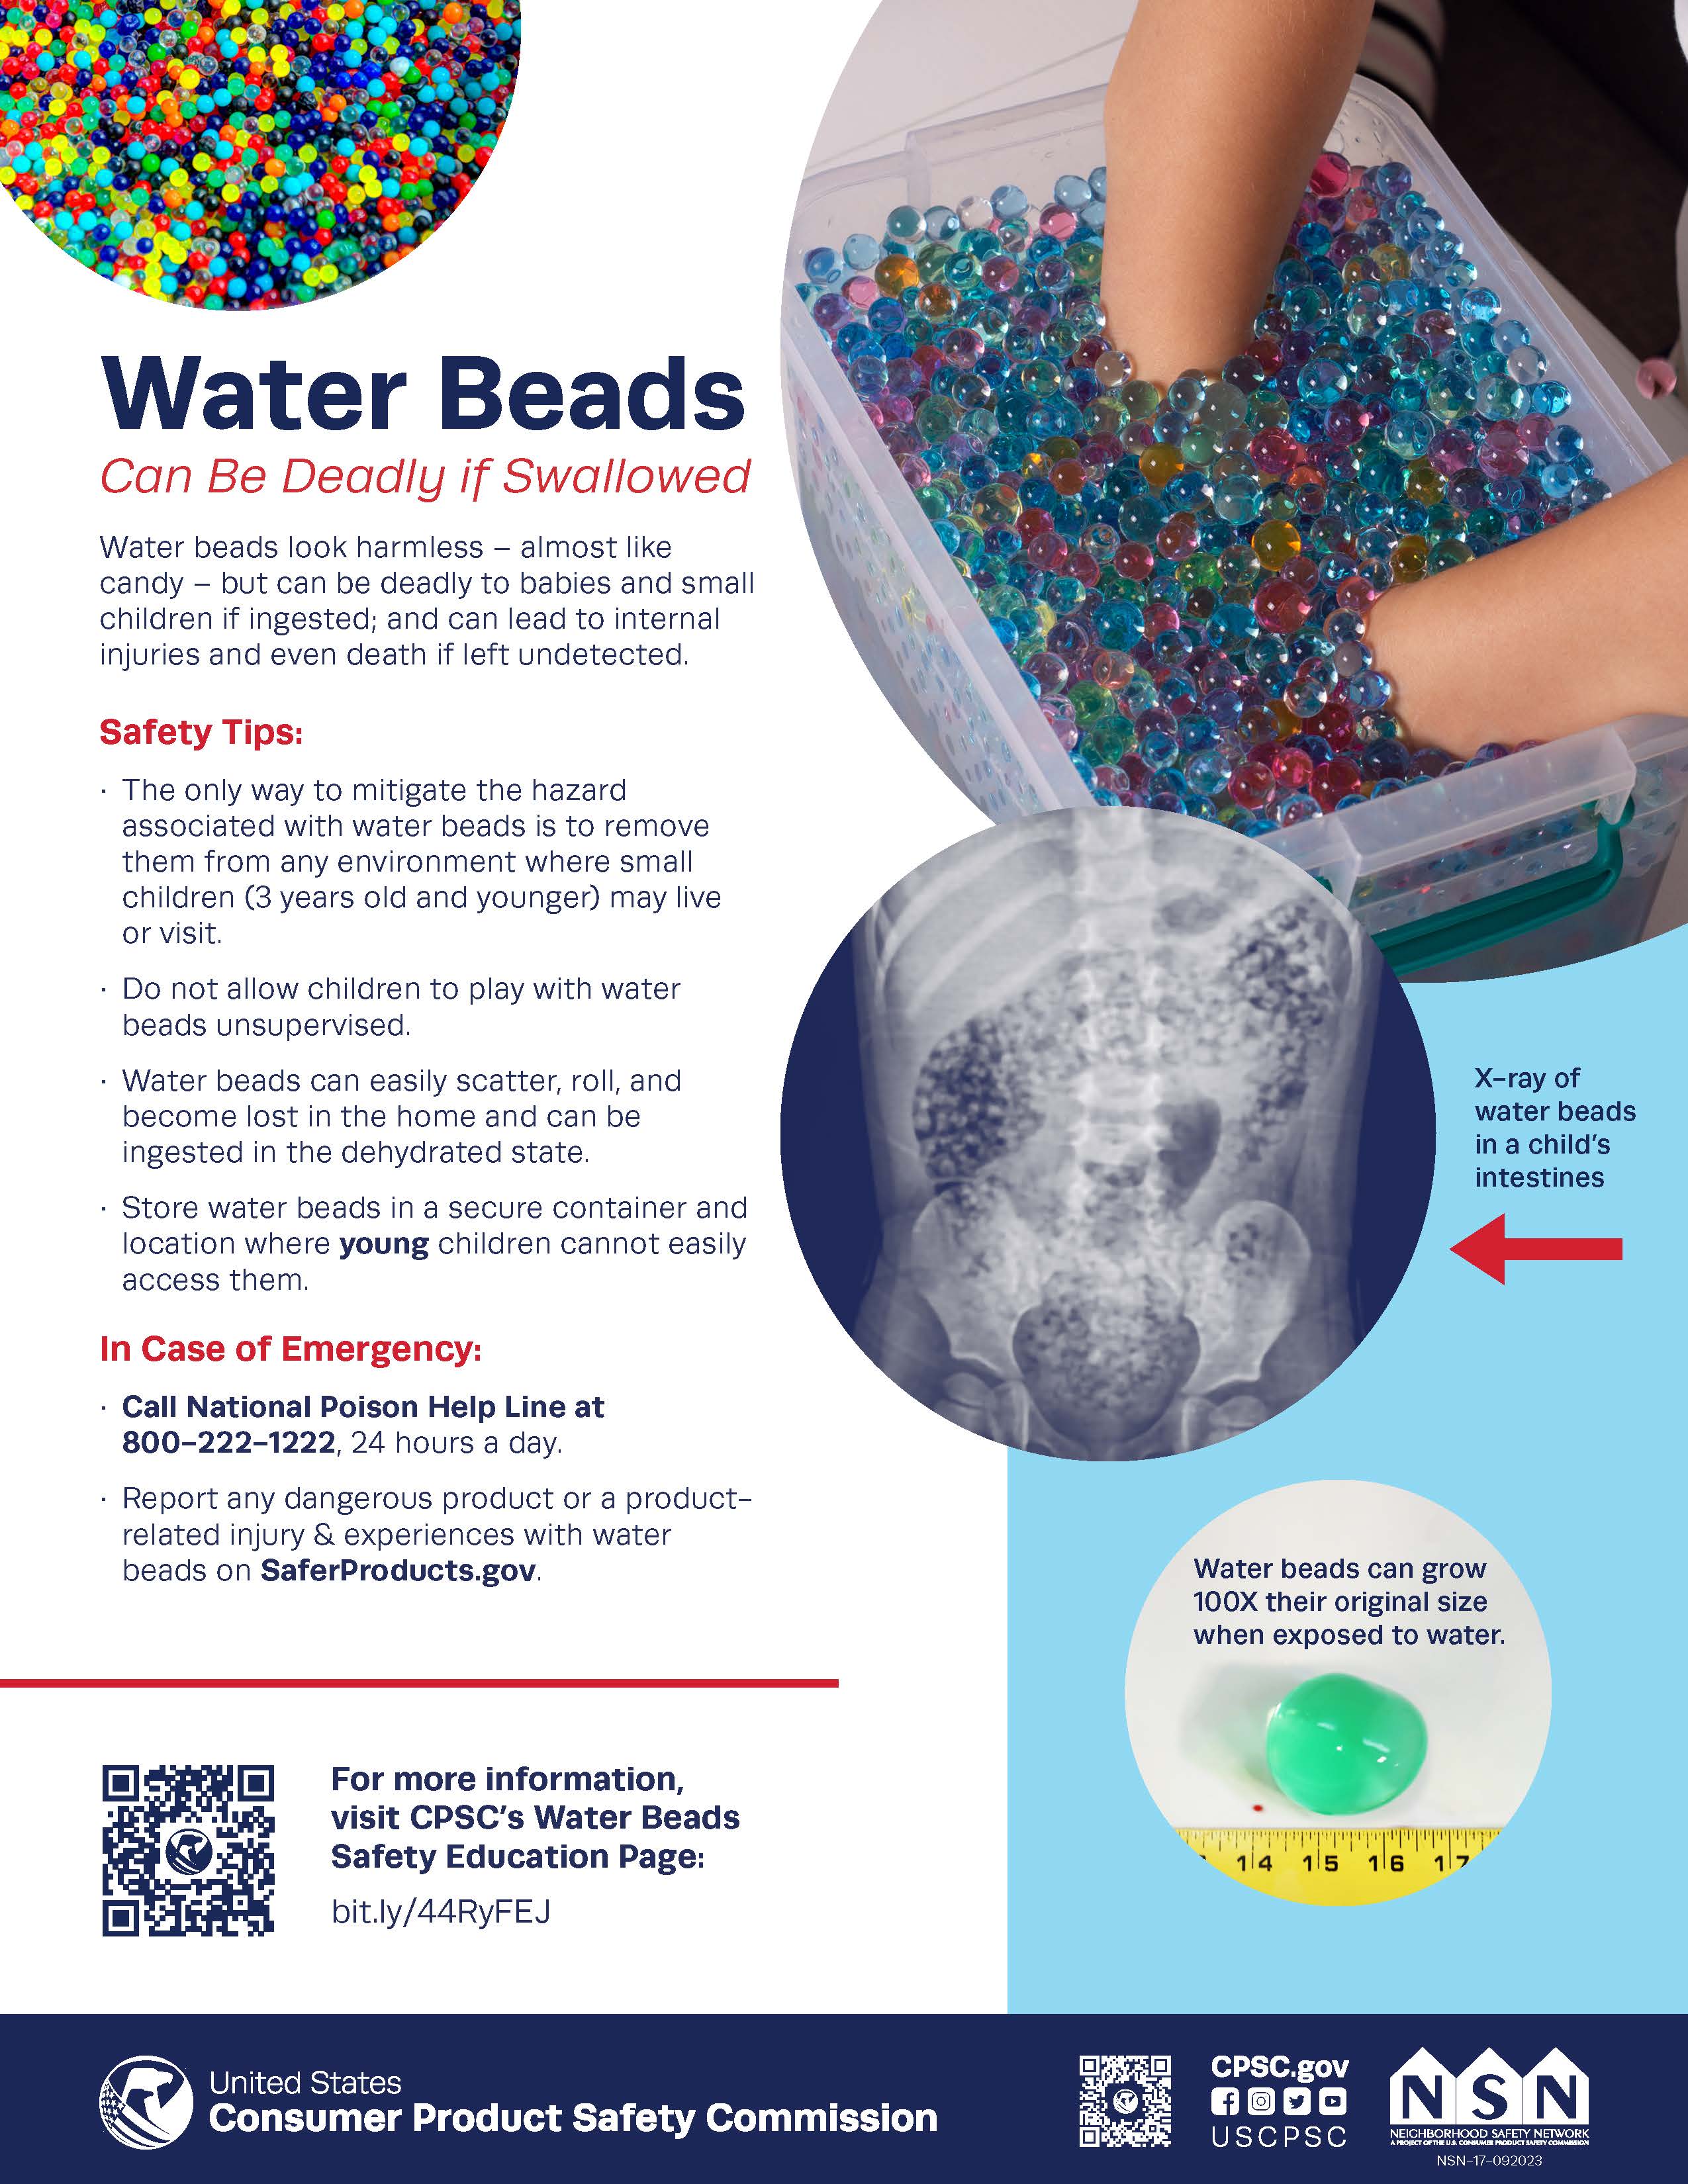 Bath Water Beads Can Expand Inside Body, Causing Kids Serious Harm